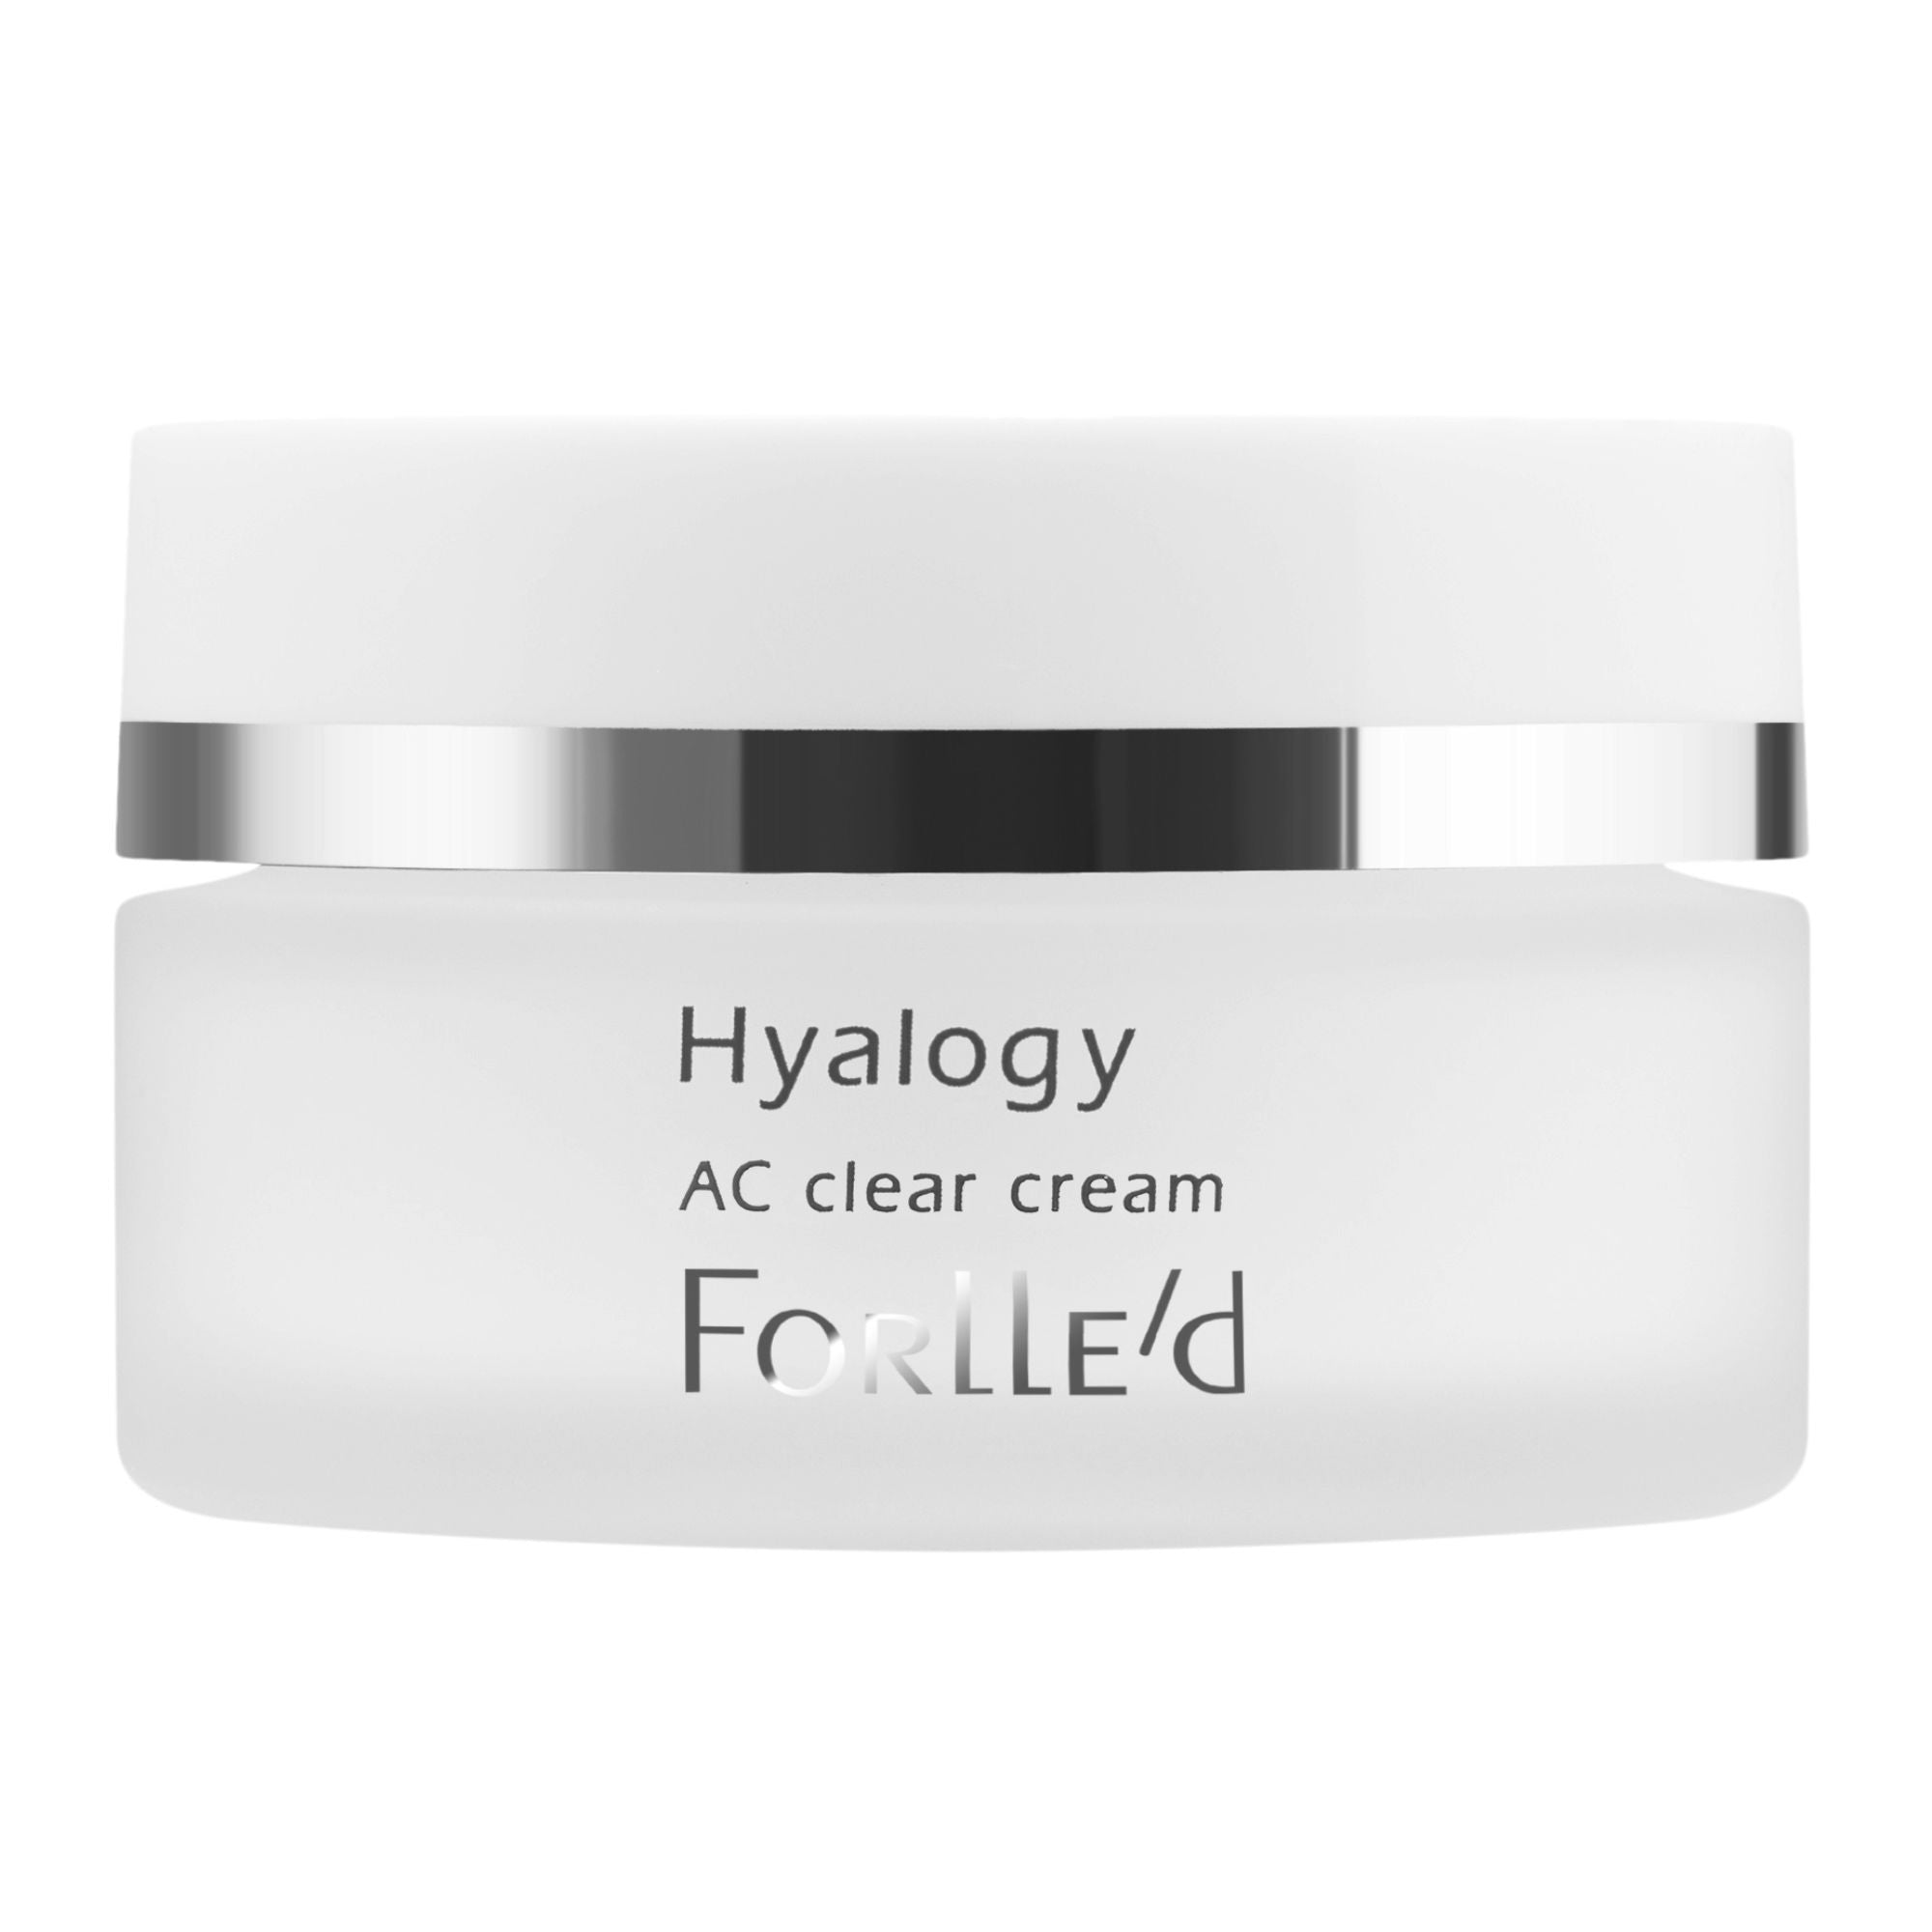 Forlle'd Hyalogy AC clear creme (50ml)